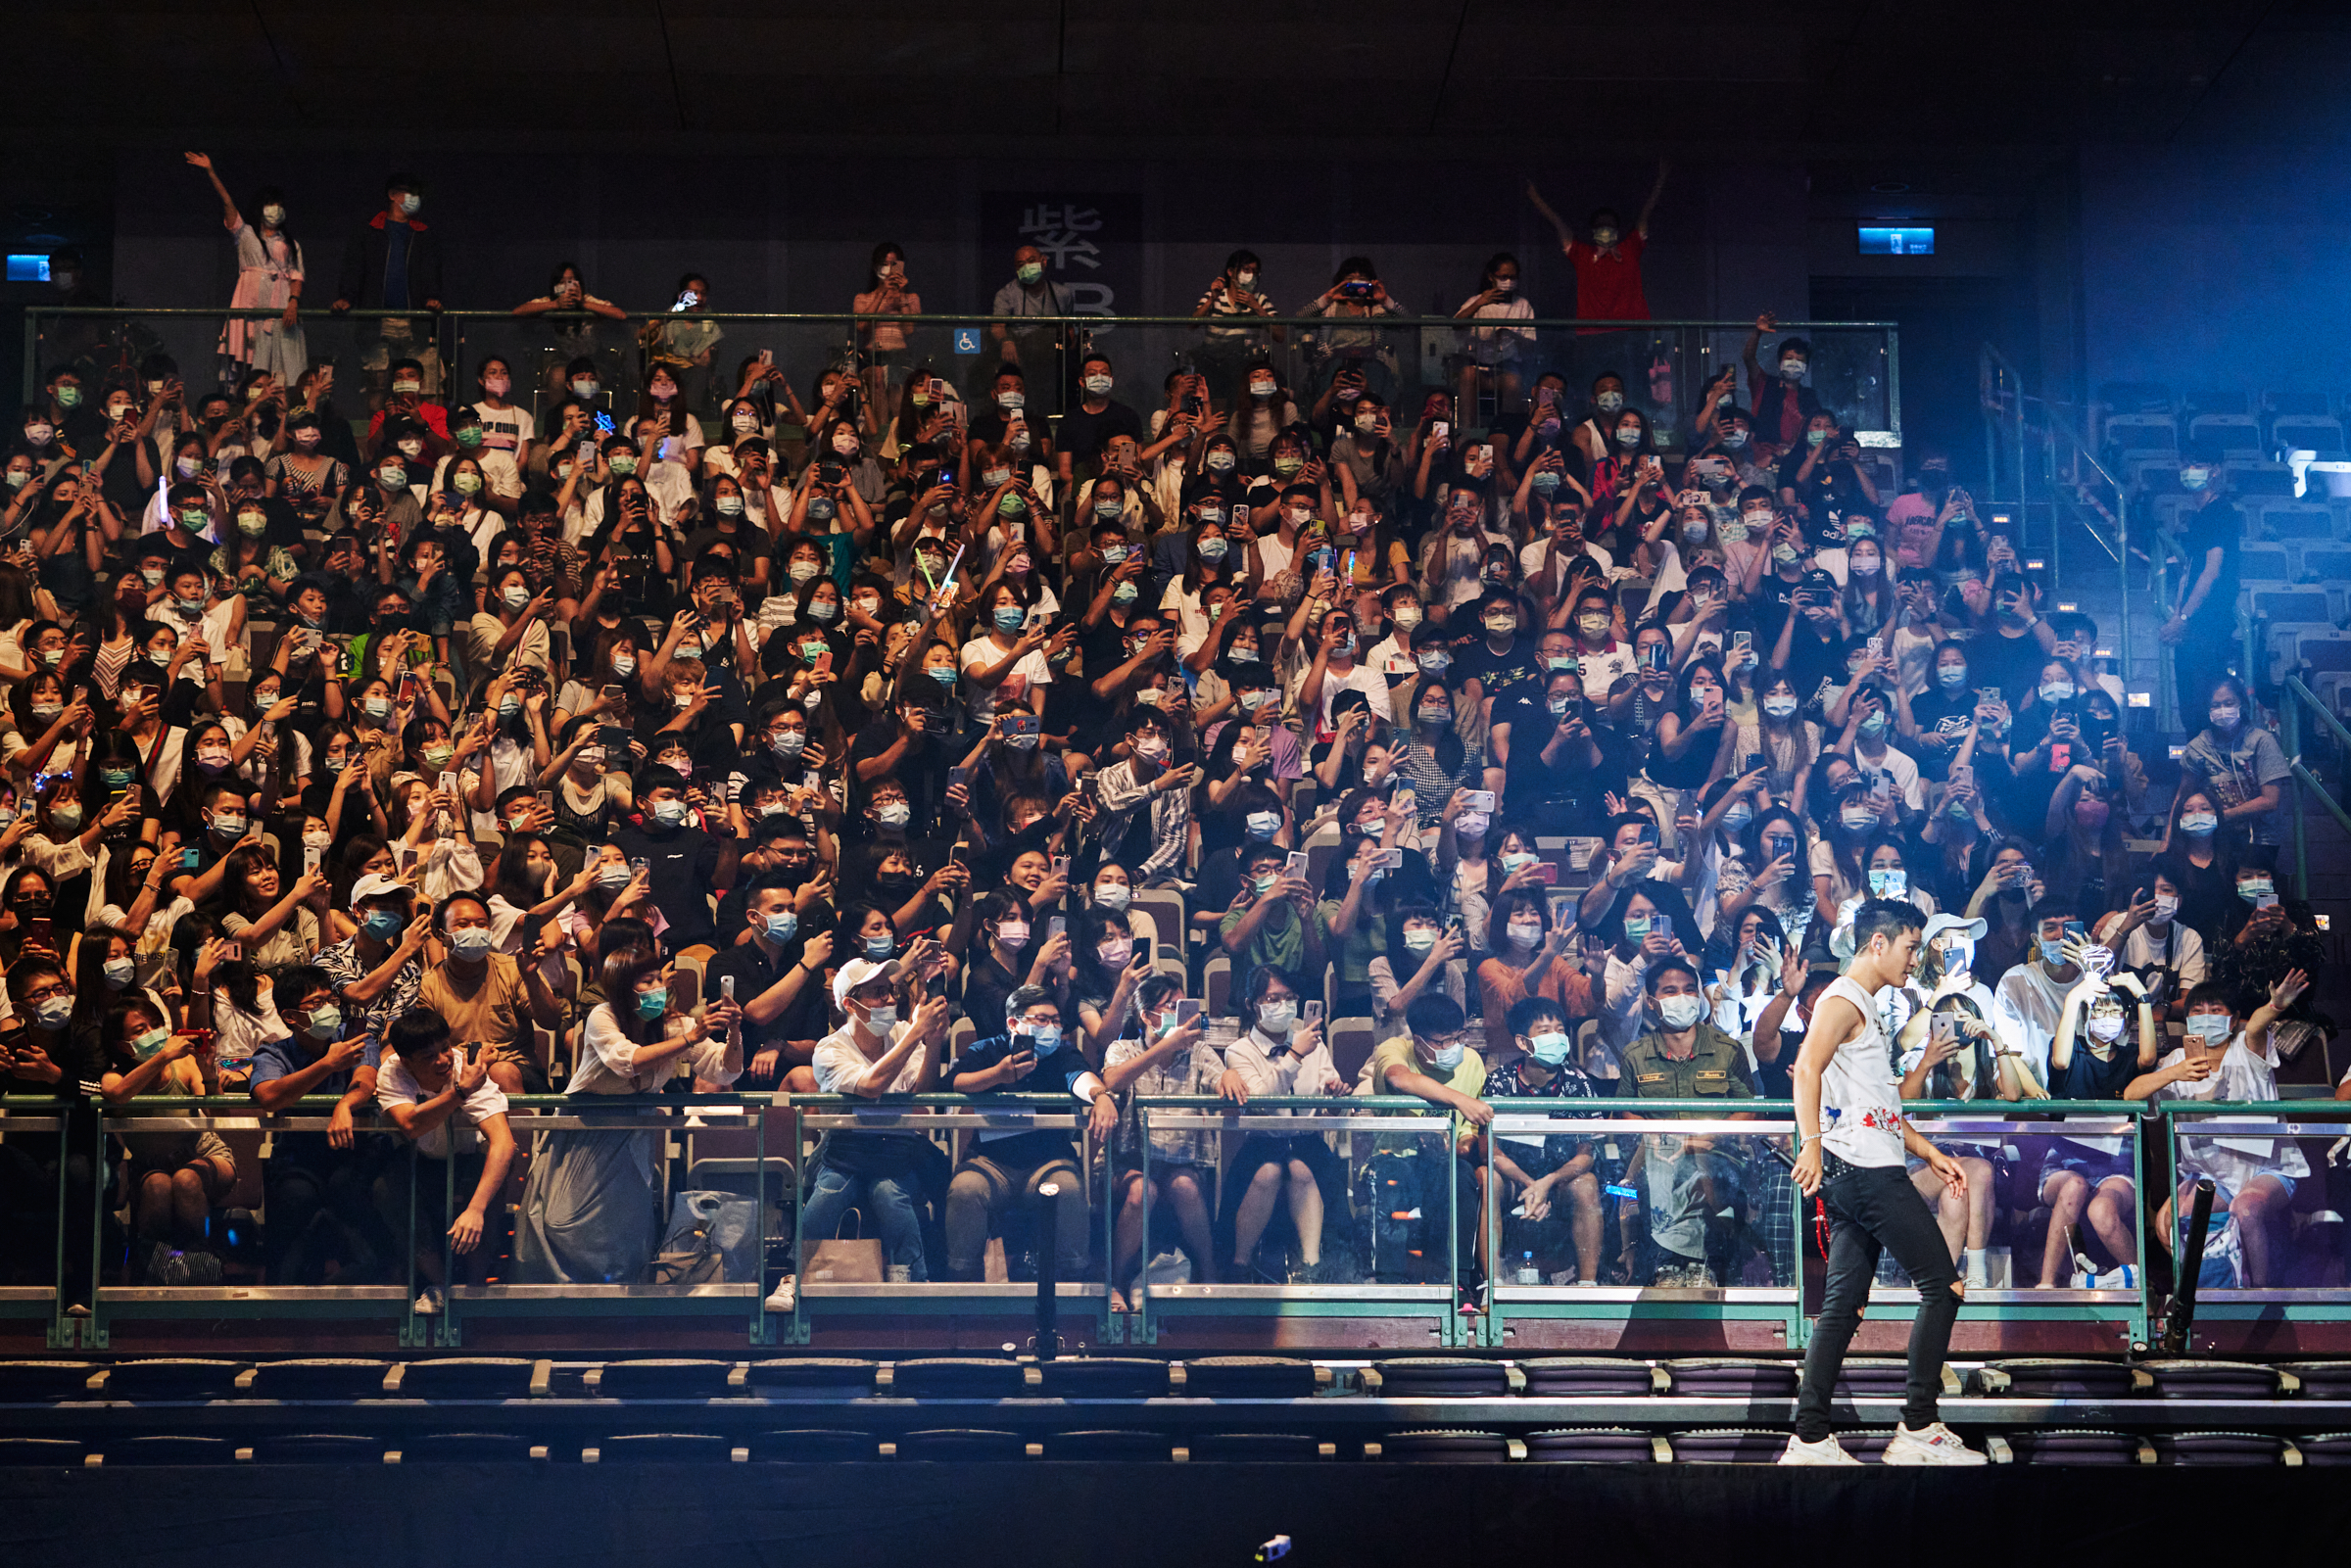 Eric Chou walks on an extended stage that brought him close to fans sitting on the second level of the Taipei Arena on Aug. 8, 2020. (An Rong Xu for TIME)